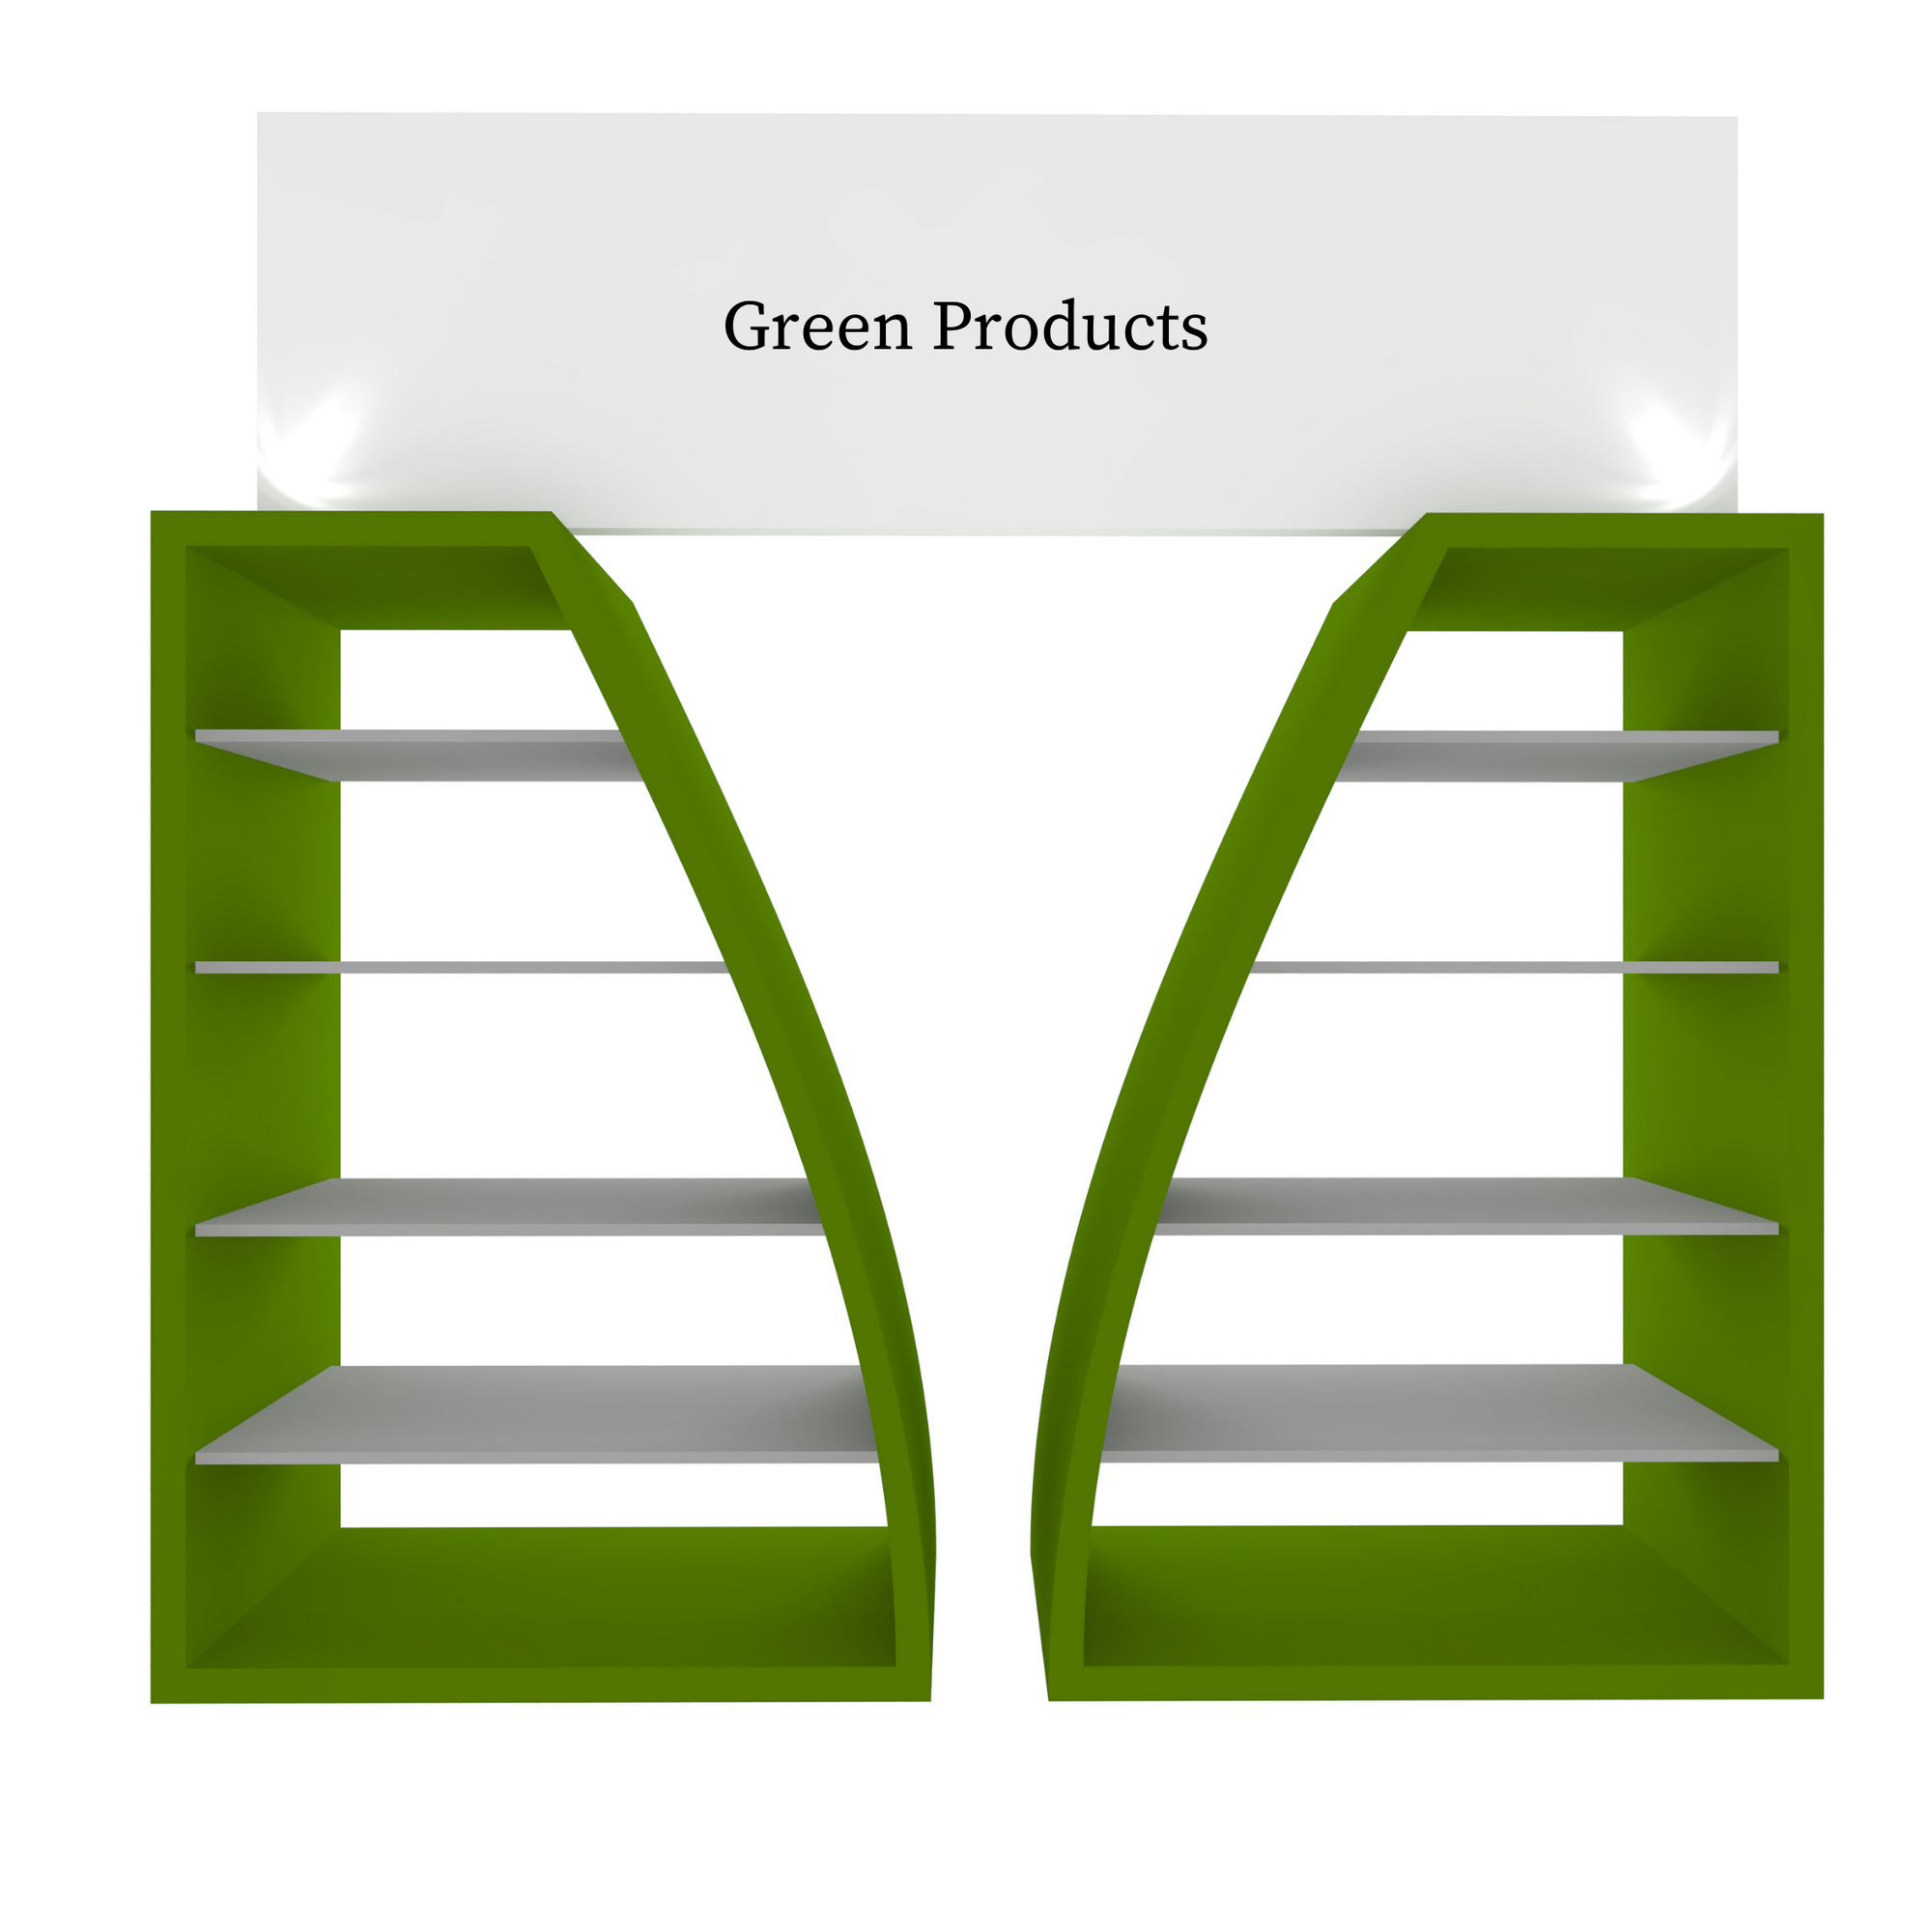 Green Products: an Emperor's New Clothes Story